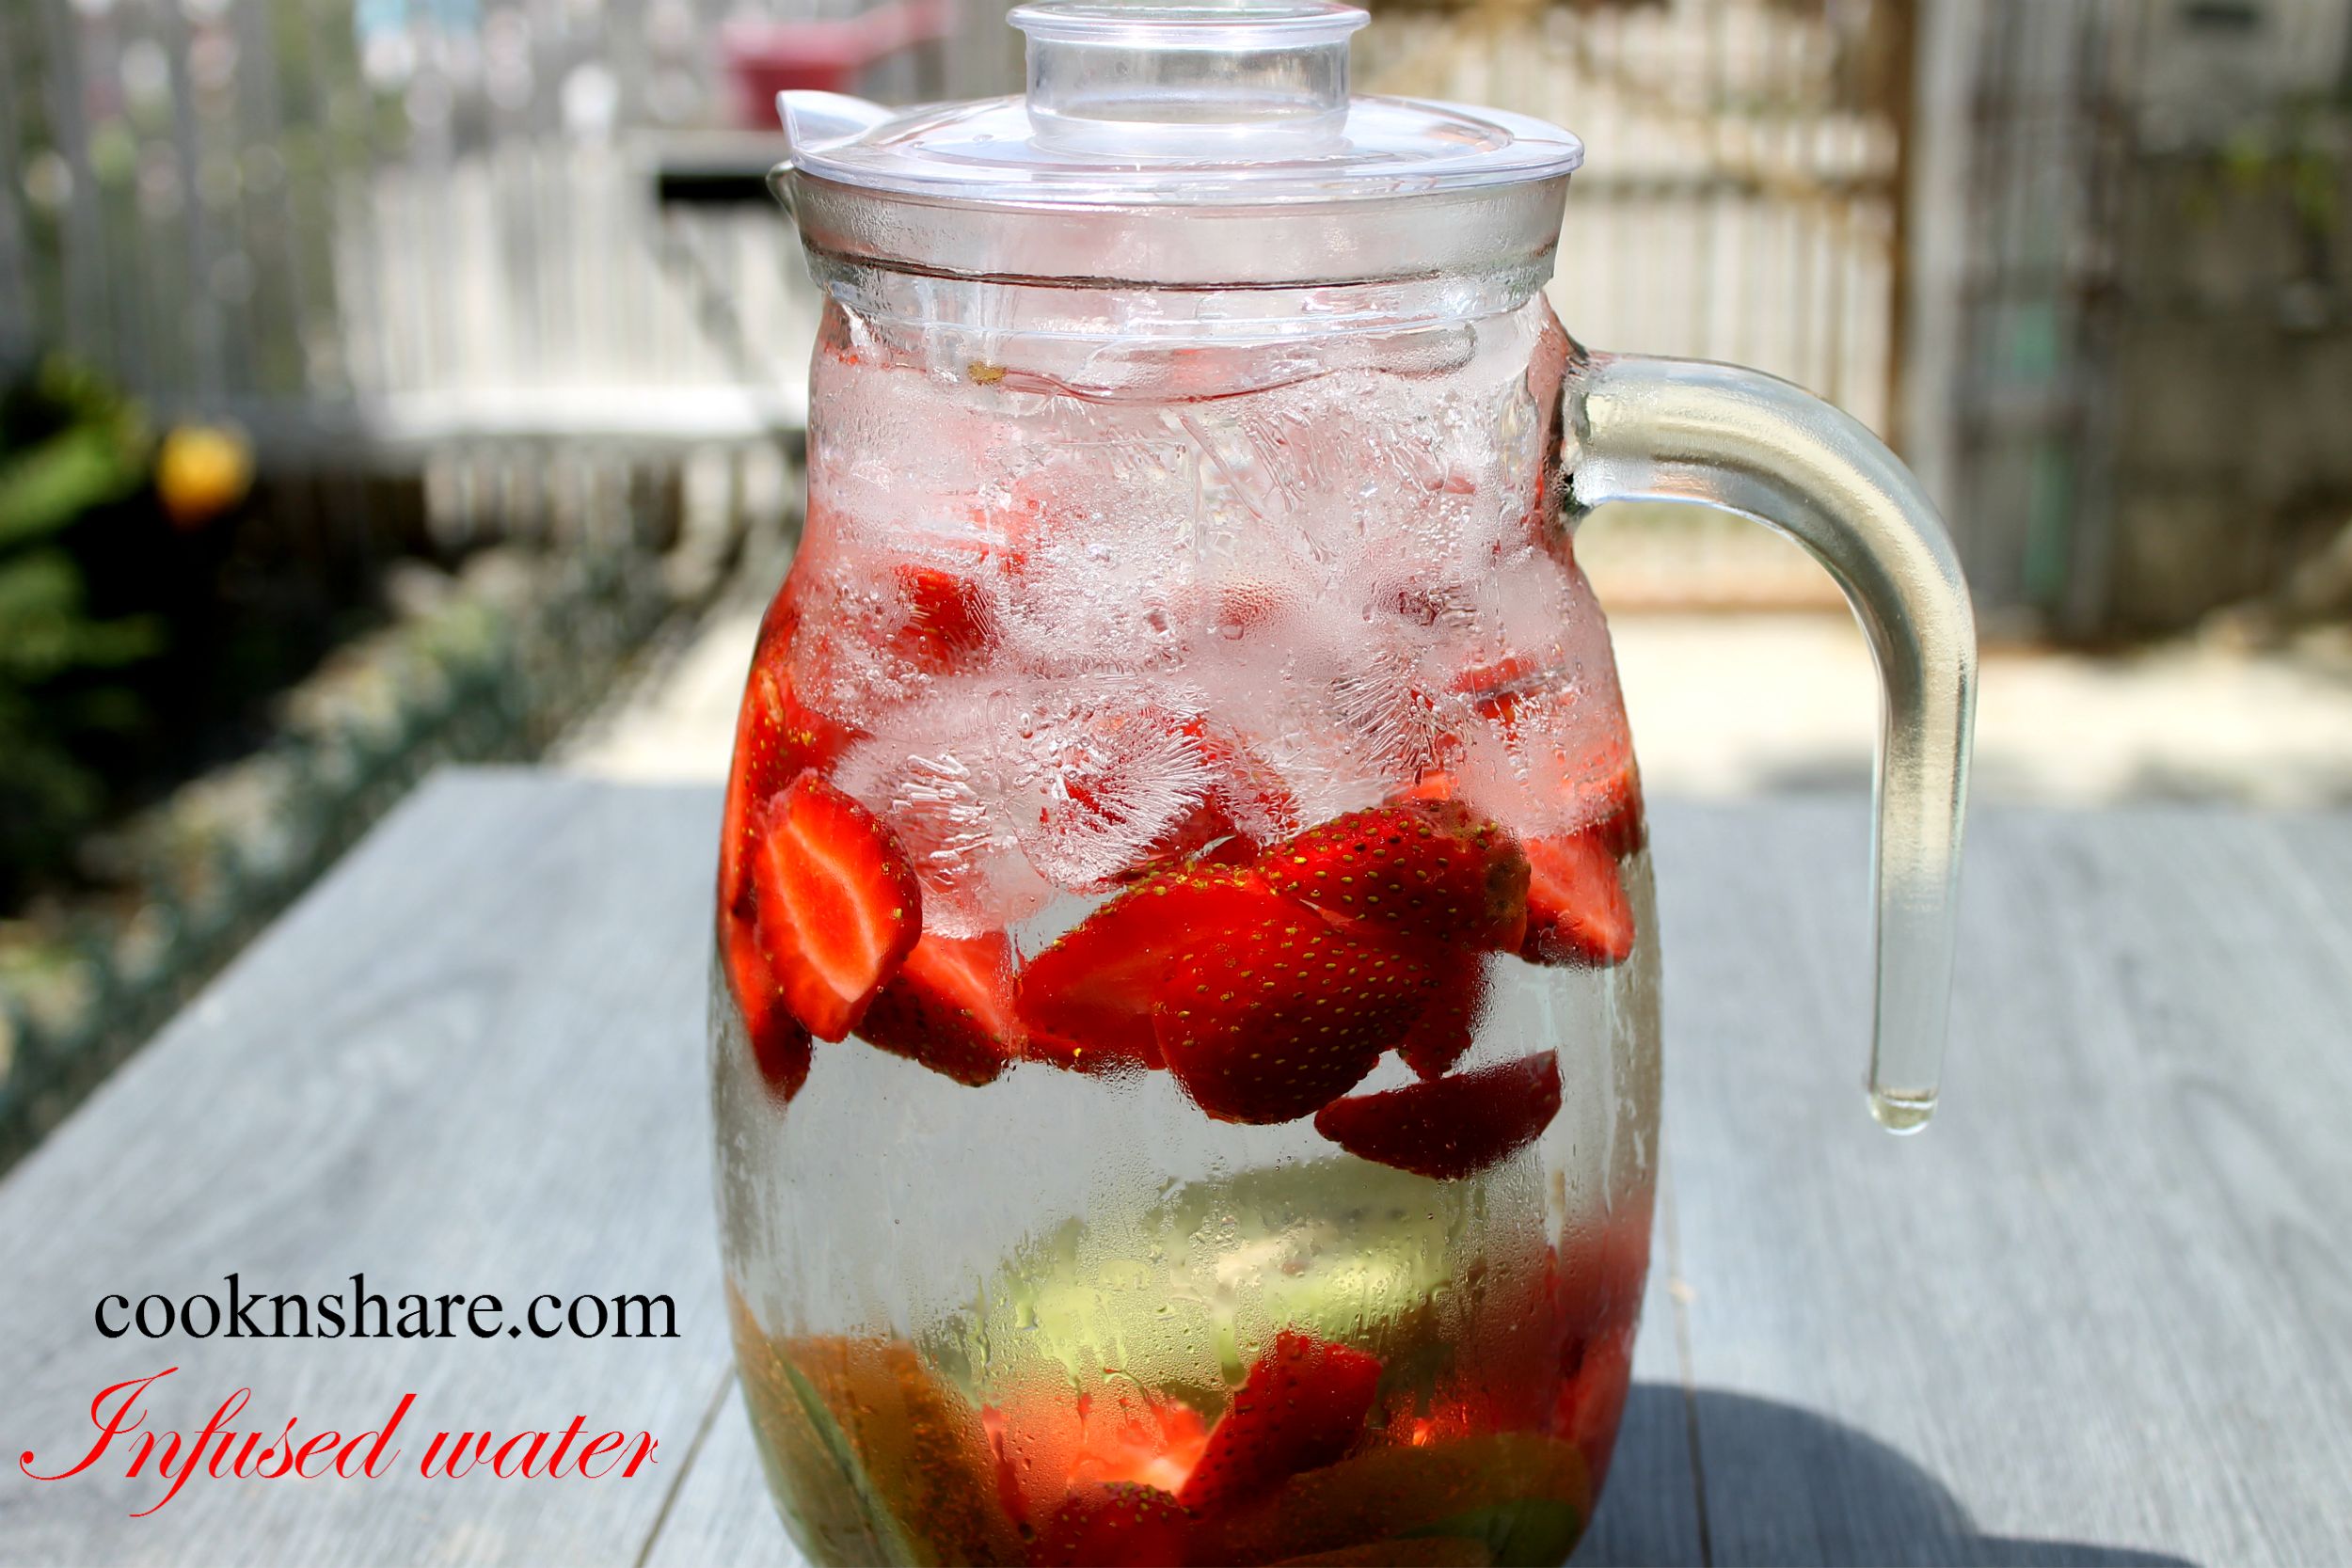 Strawberry and kiwi infused water